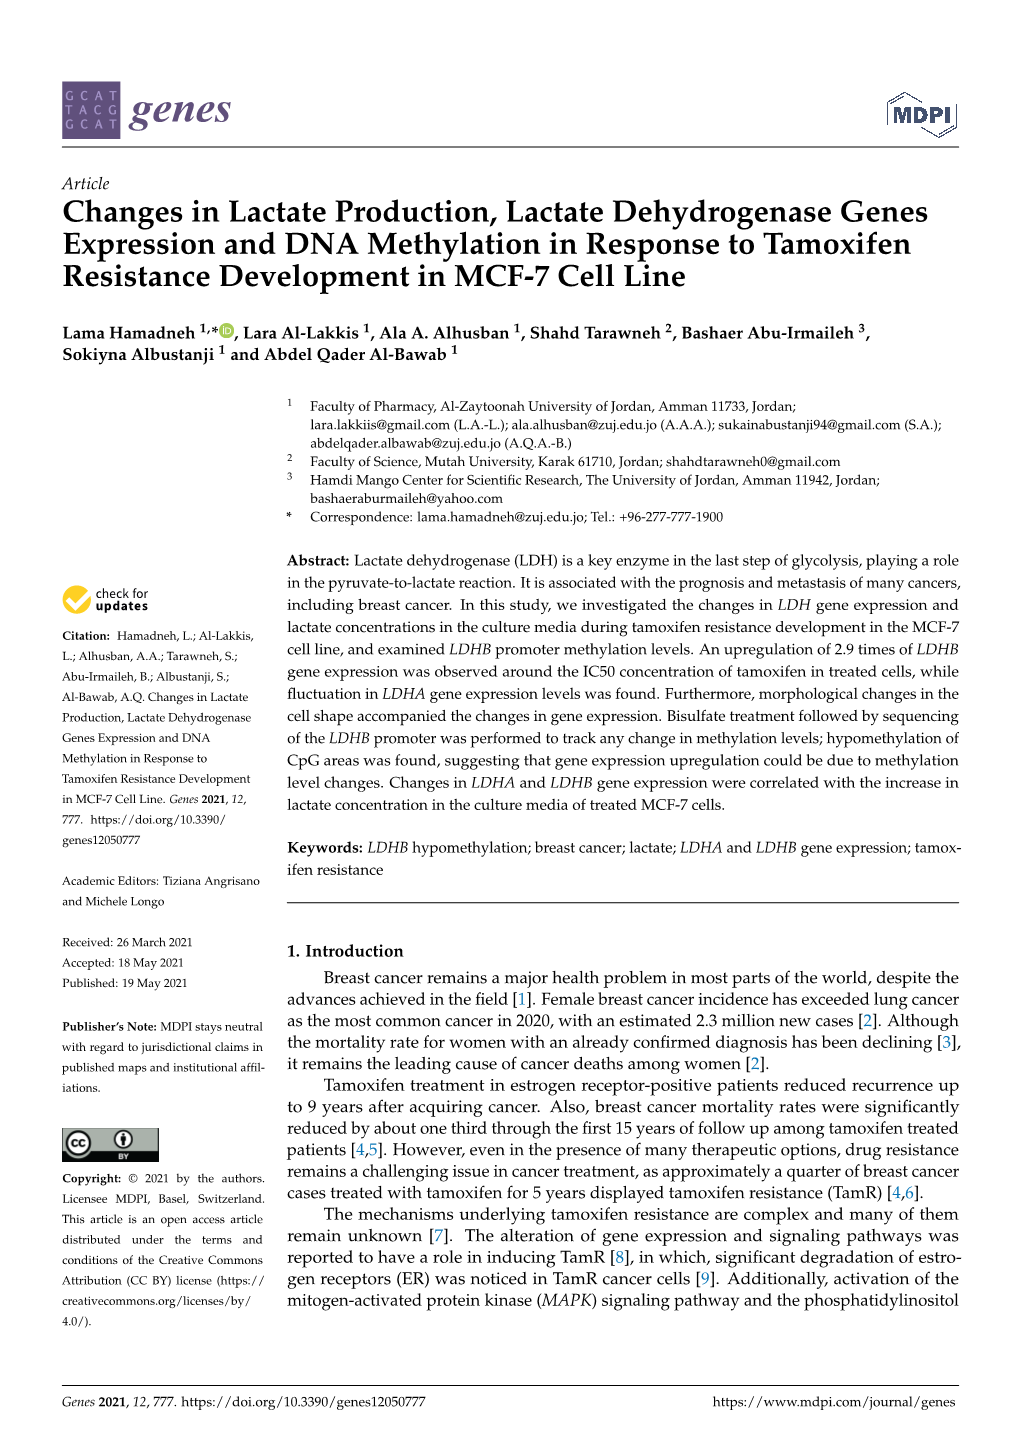 Changes in Lactate Production, Lactate Dehydrogenase Genes Expression and DNA Methylation in Response to Tamoxifen Resistance Development in MCF-7 Cell Line